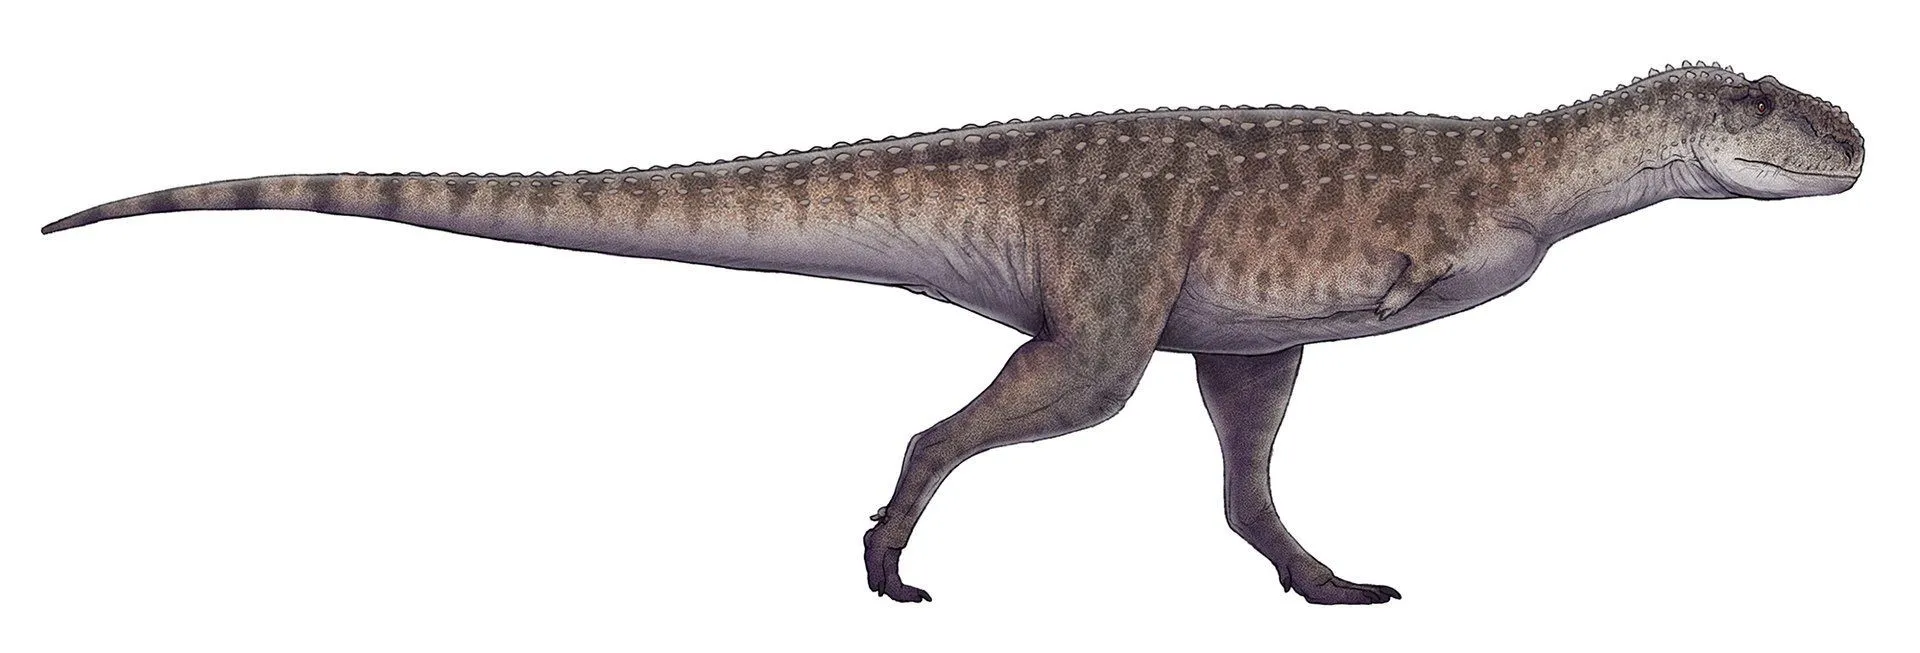 Majungasaurus had replaceable teeth and short arms.